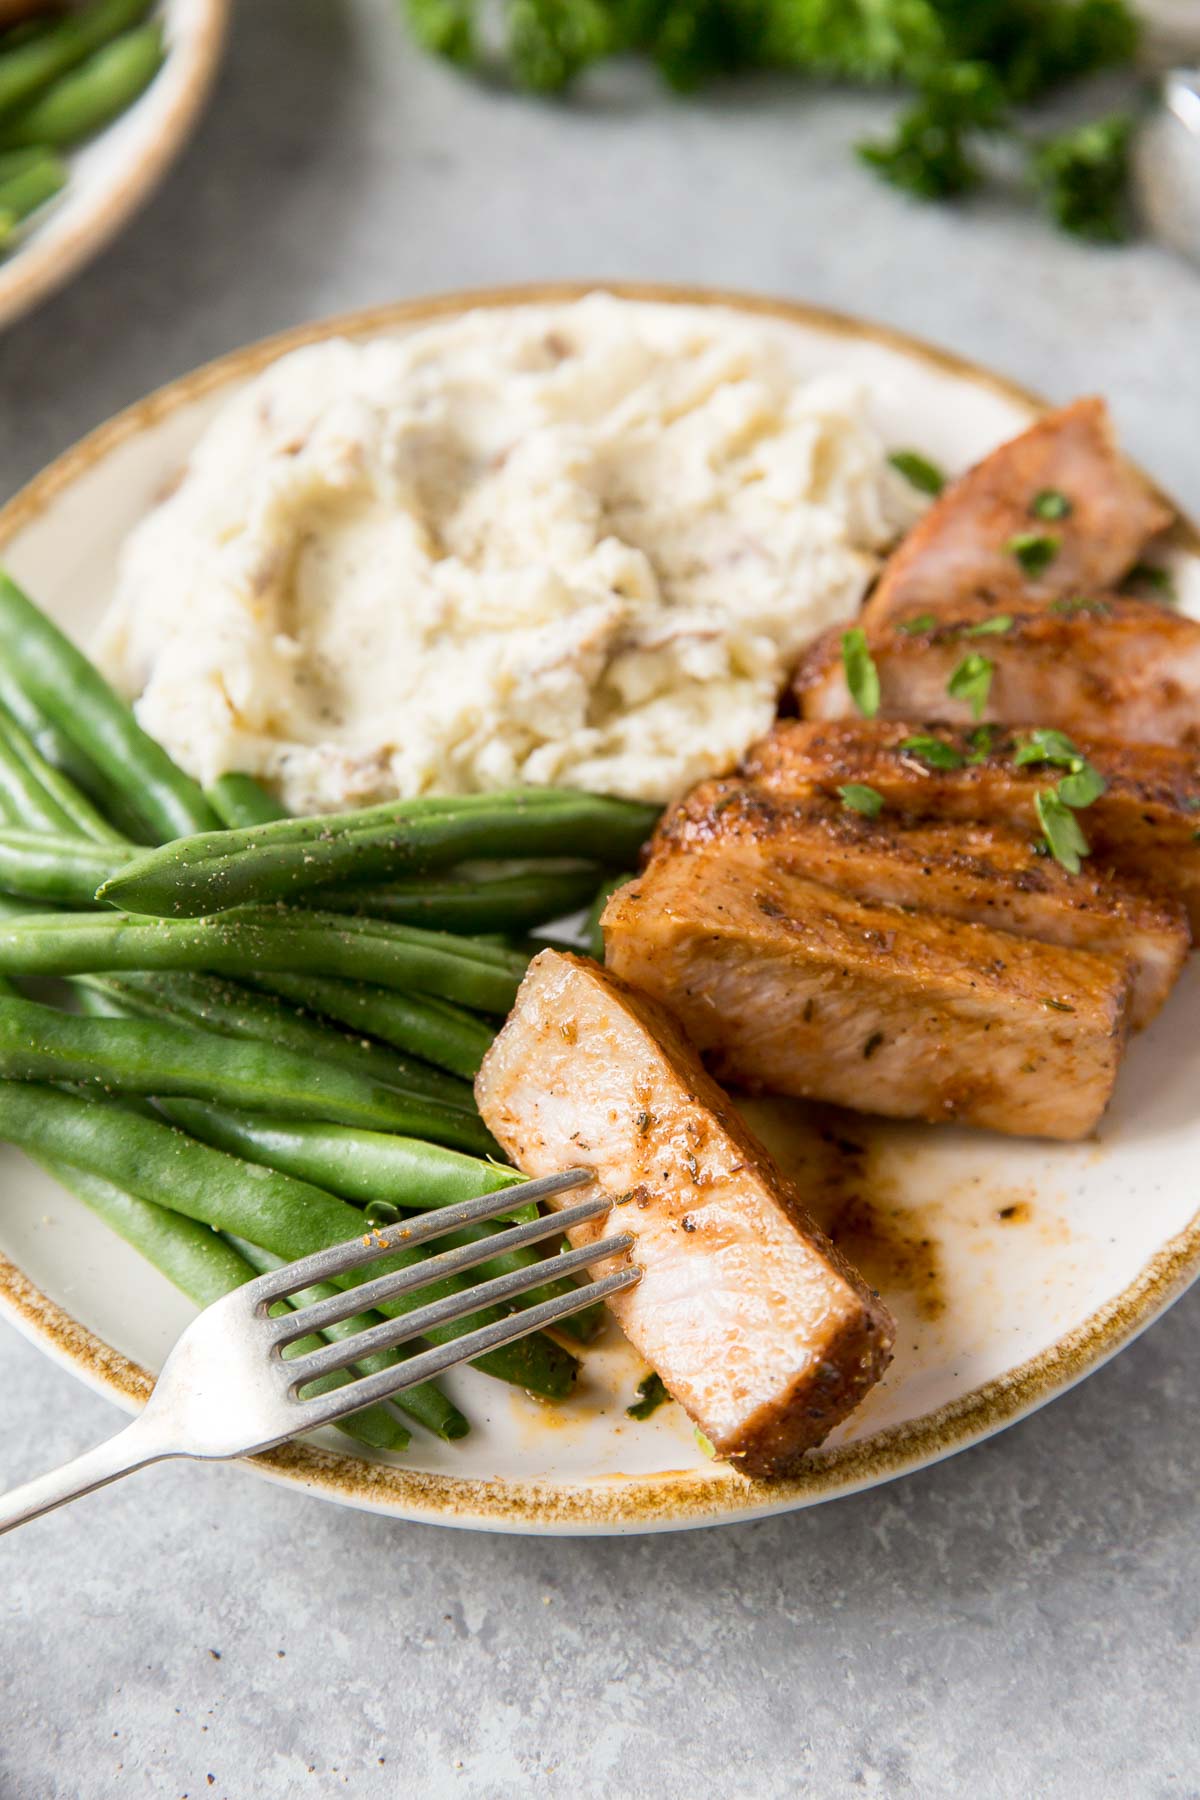 baked pork chop served with green beans and mashed potatoes